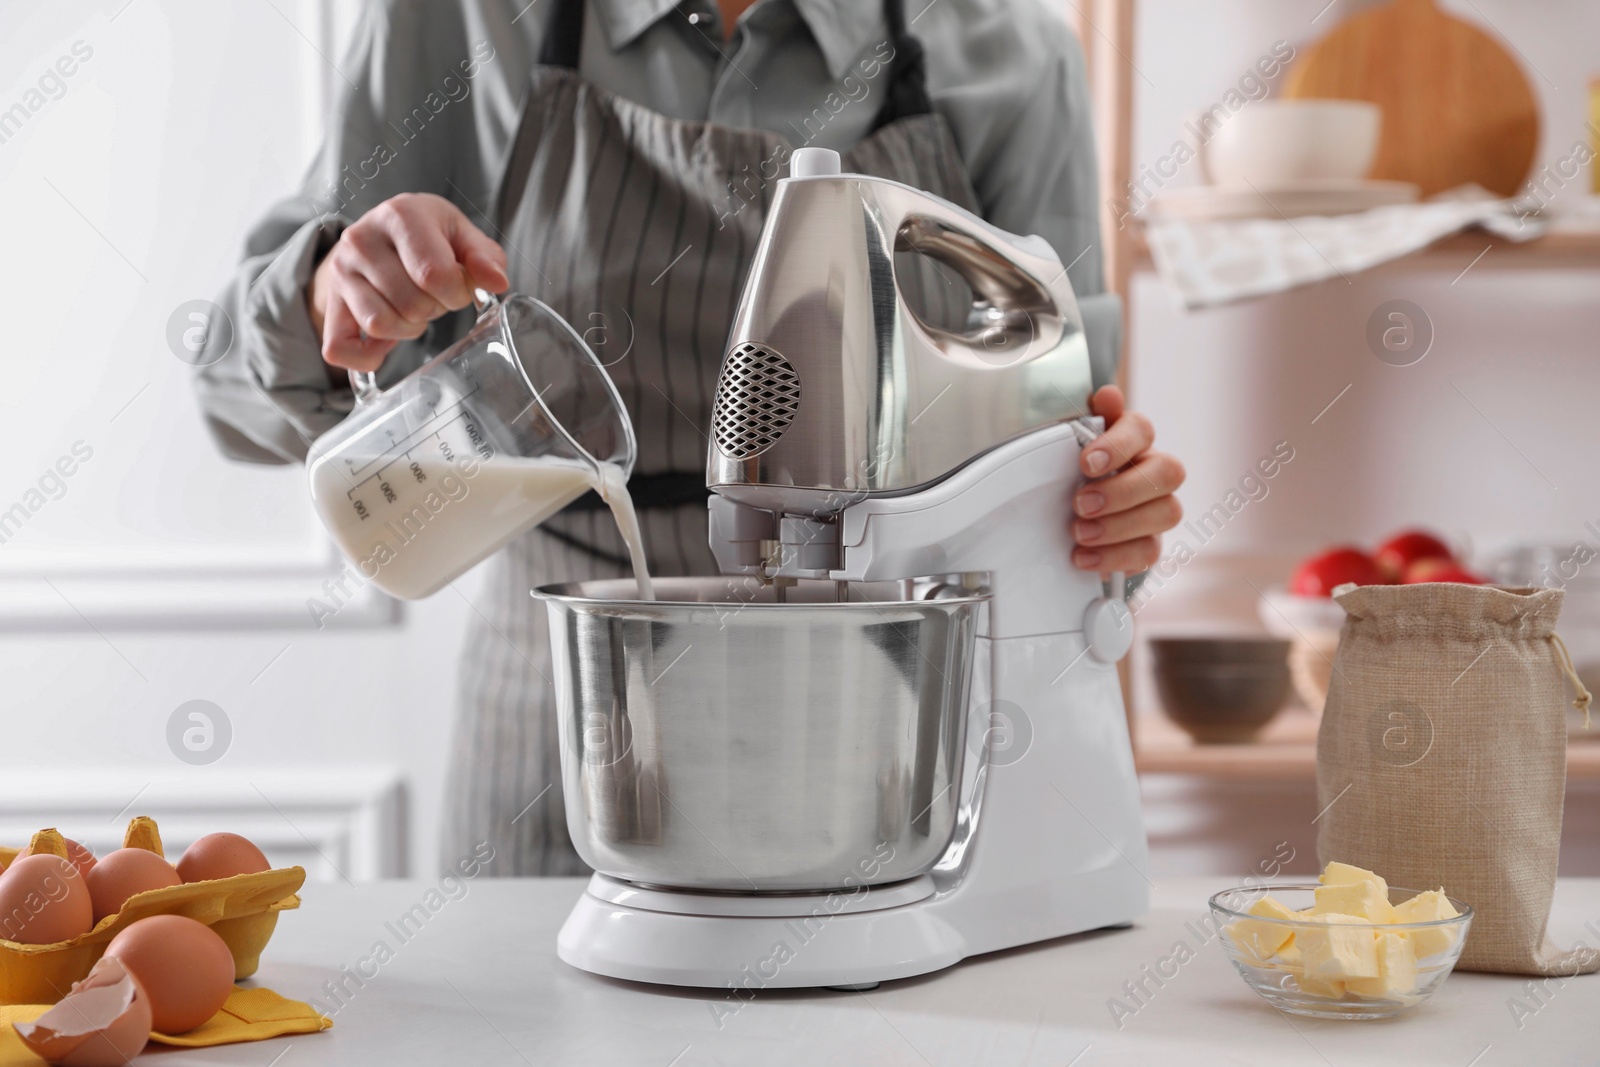 Photo of Woman pouring milk into bowl of stand mixer while making dough at table indoors, closeup